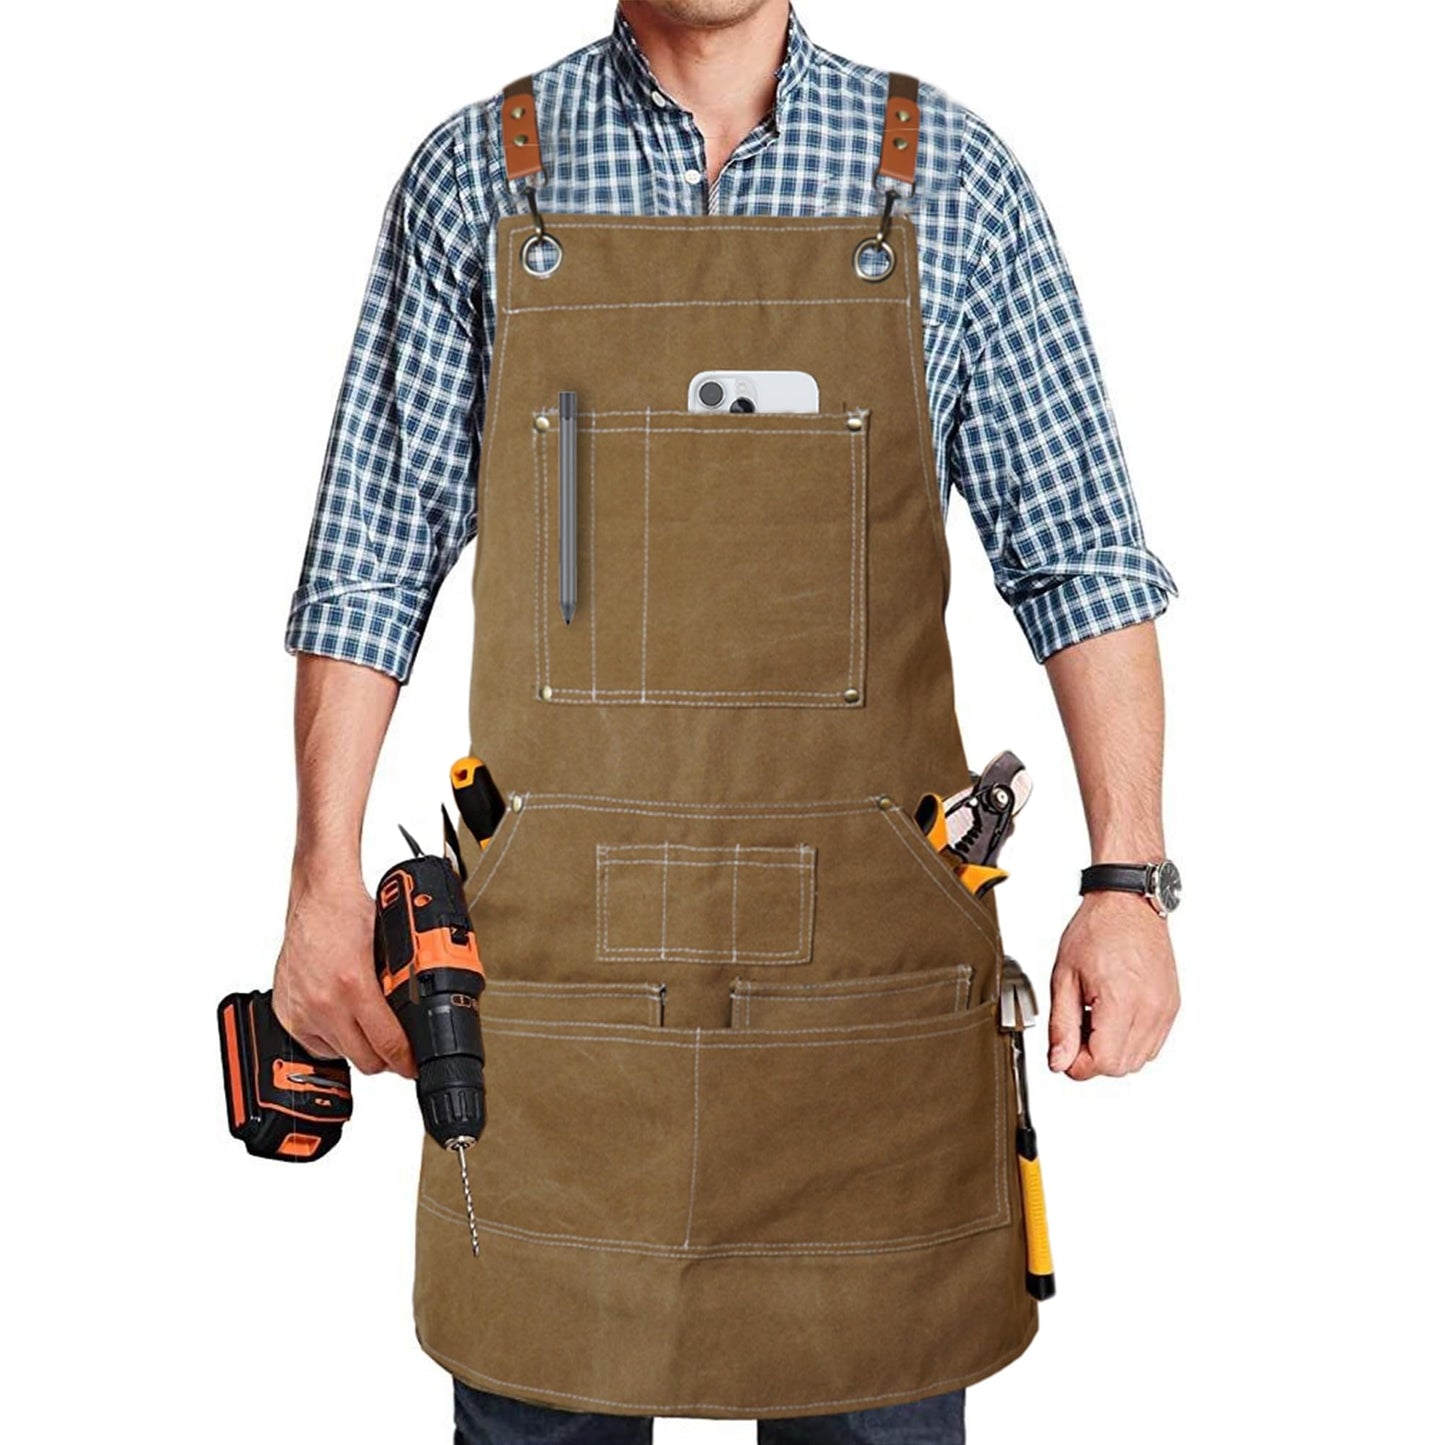 Yxiang Woodworking Apron for Men,Work Apron with 11 Tool Pockets Heavy Duty Waxed Canvas Workshop Tool Aprons